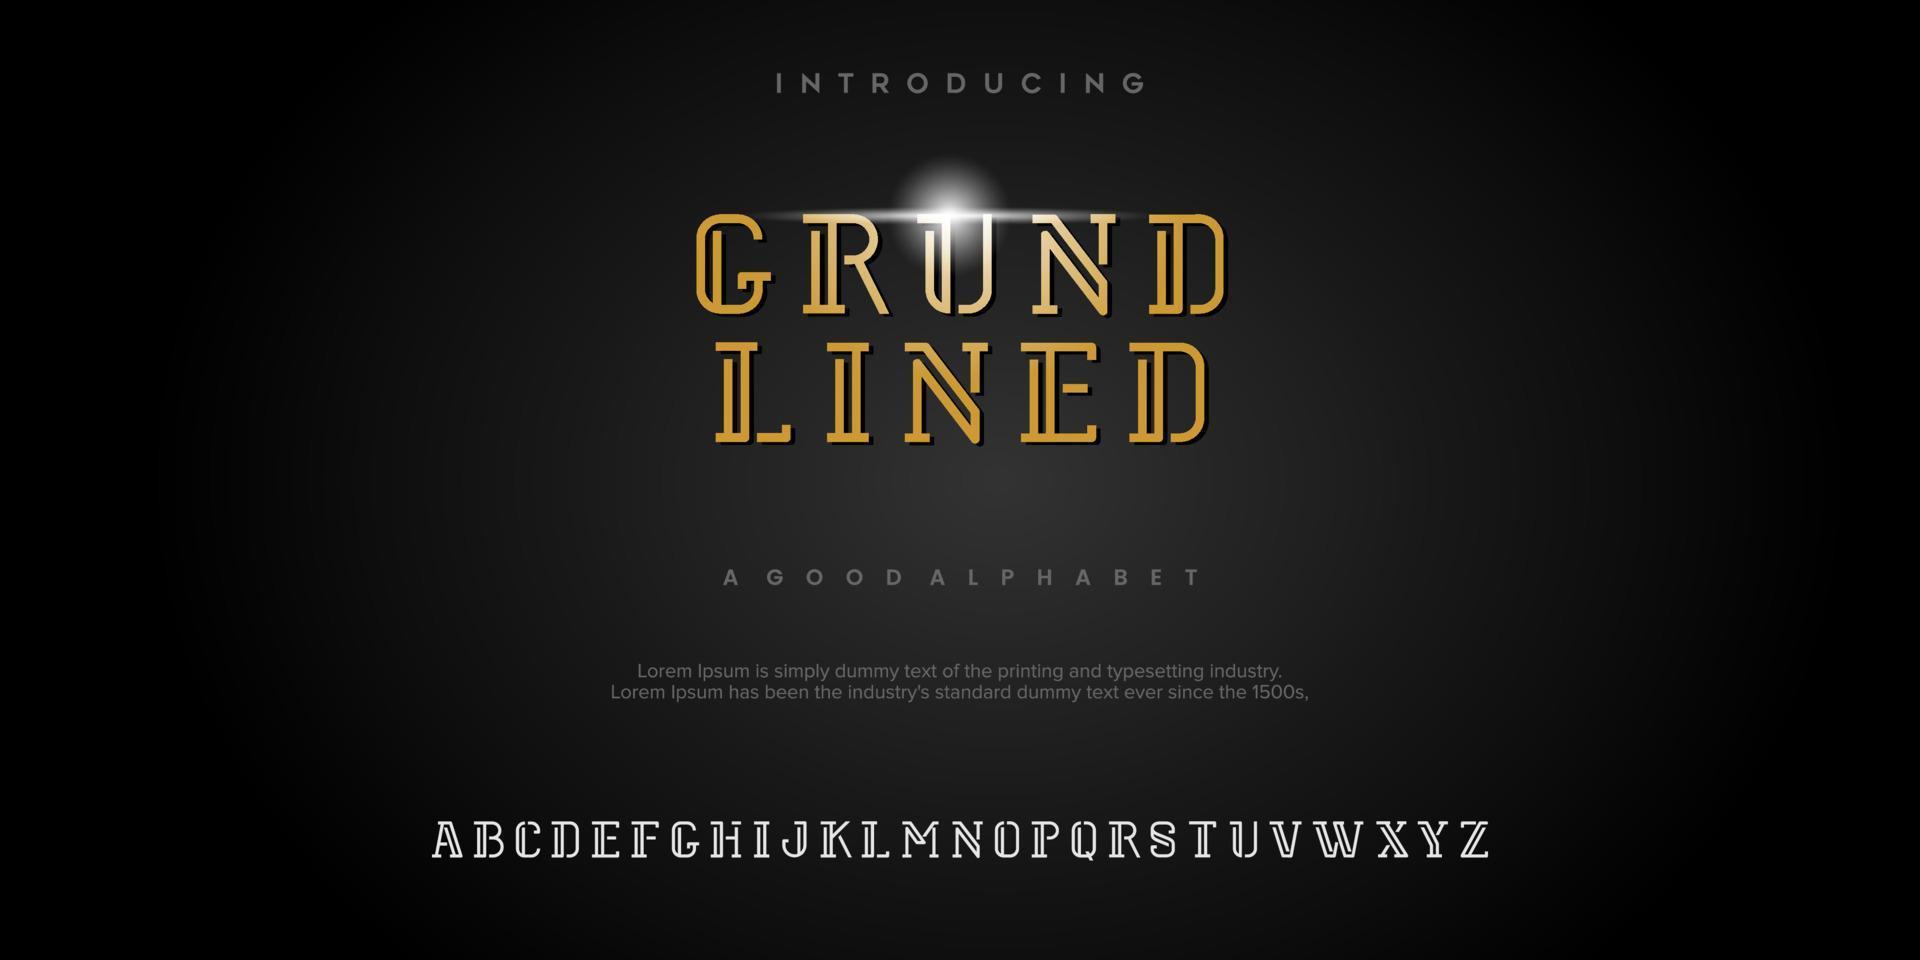 GRUND LINED Abstract Fashion font alphabet. Typography typeface. vector illustration